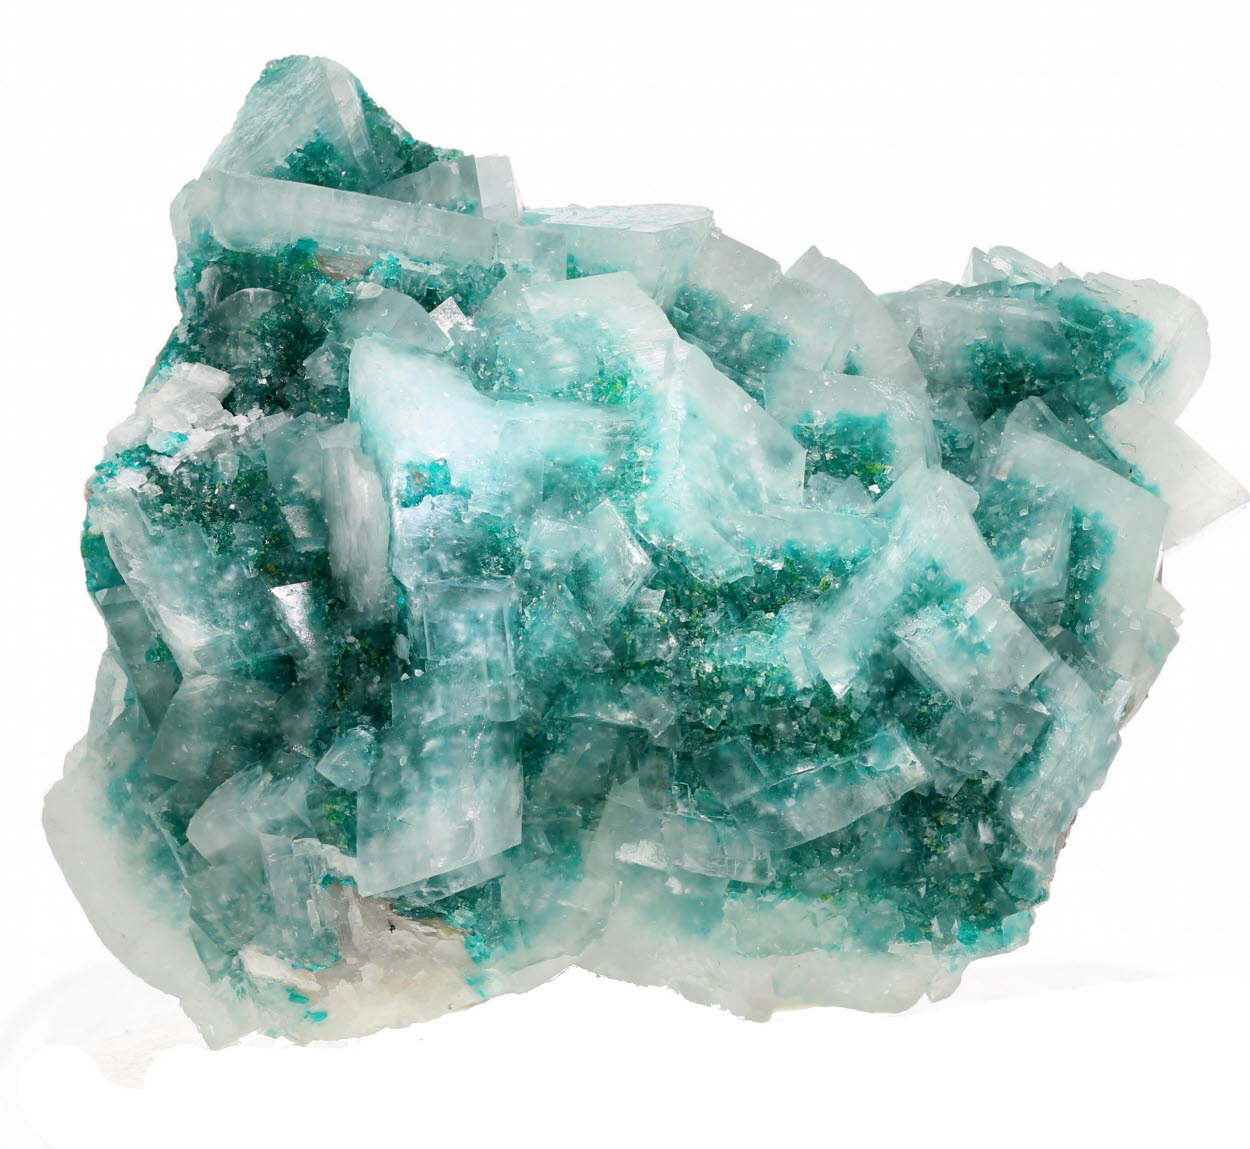 Calcite With Dioptase Inclusions